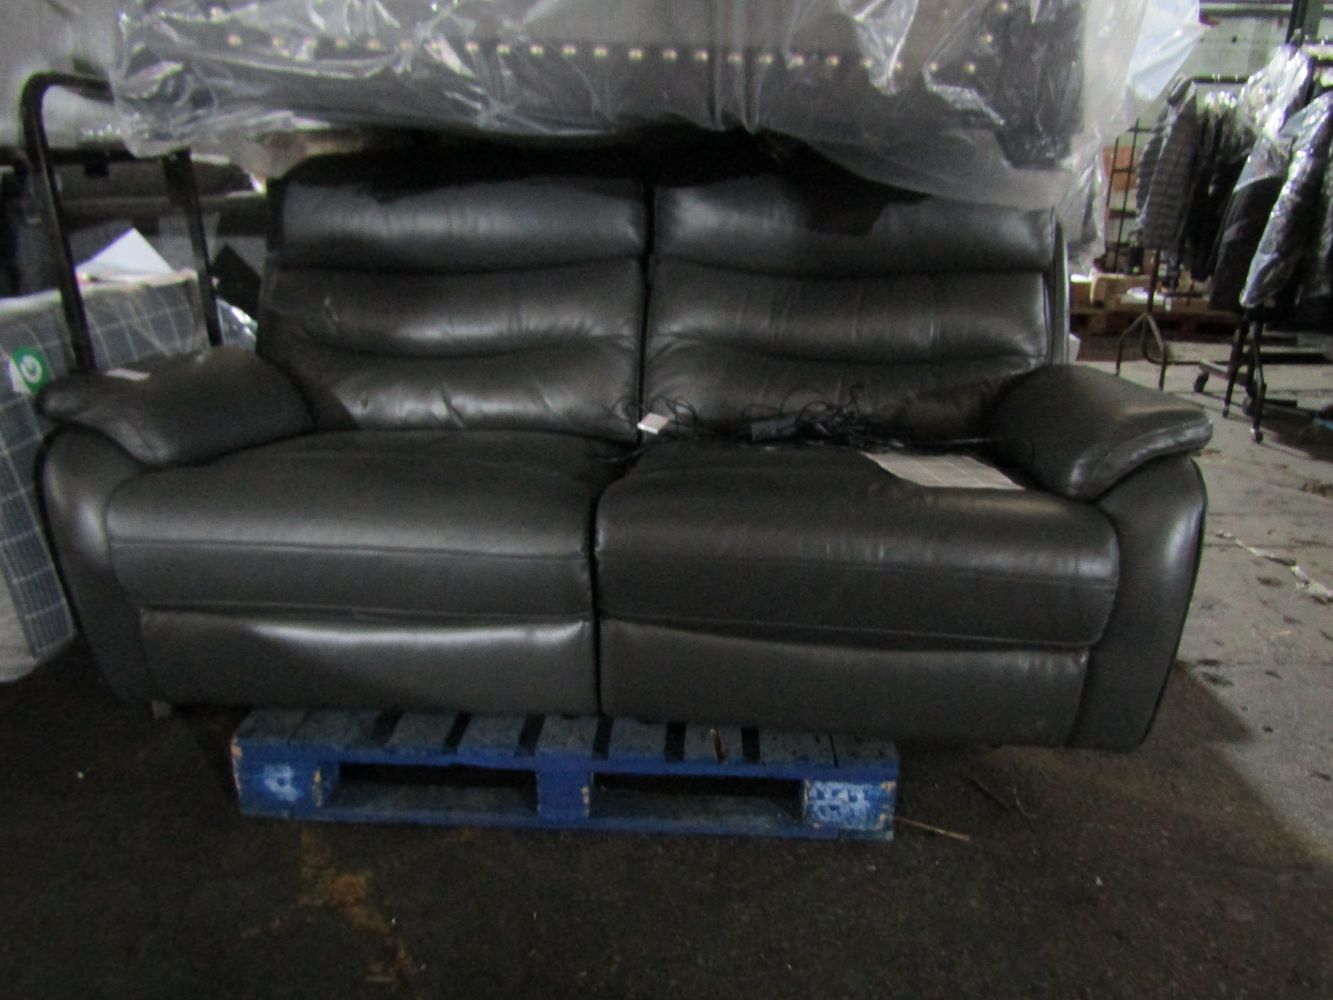 New lots being added this afternoon to Sofas and Armchairs from SCS, Costco and more at up to 90% off RRP